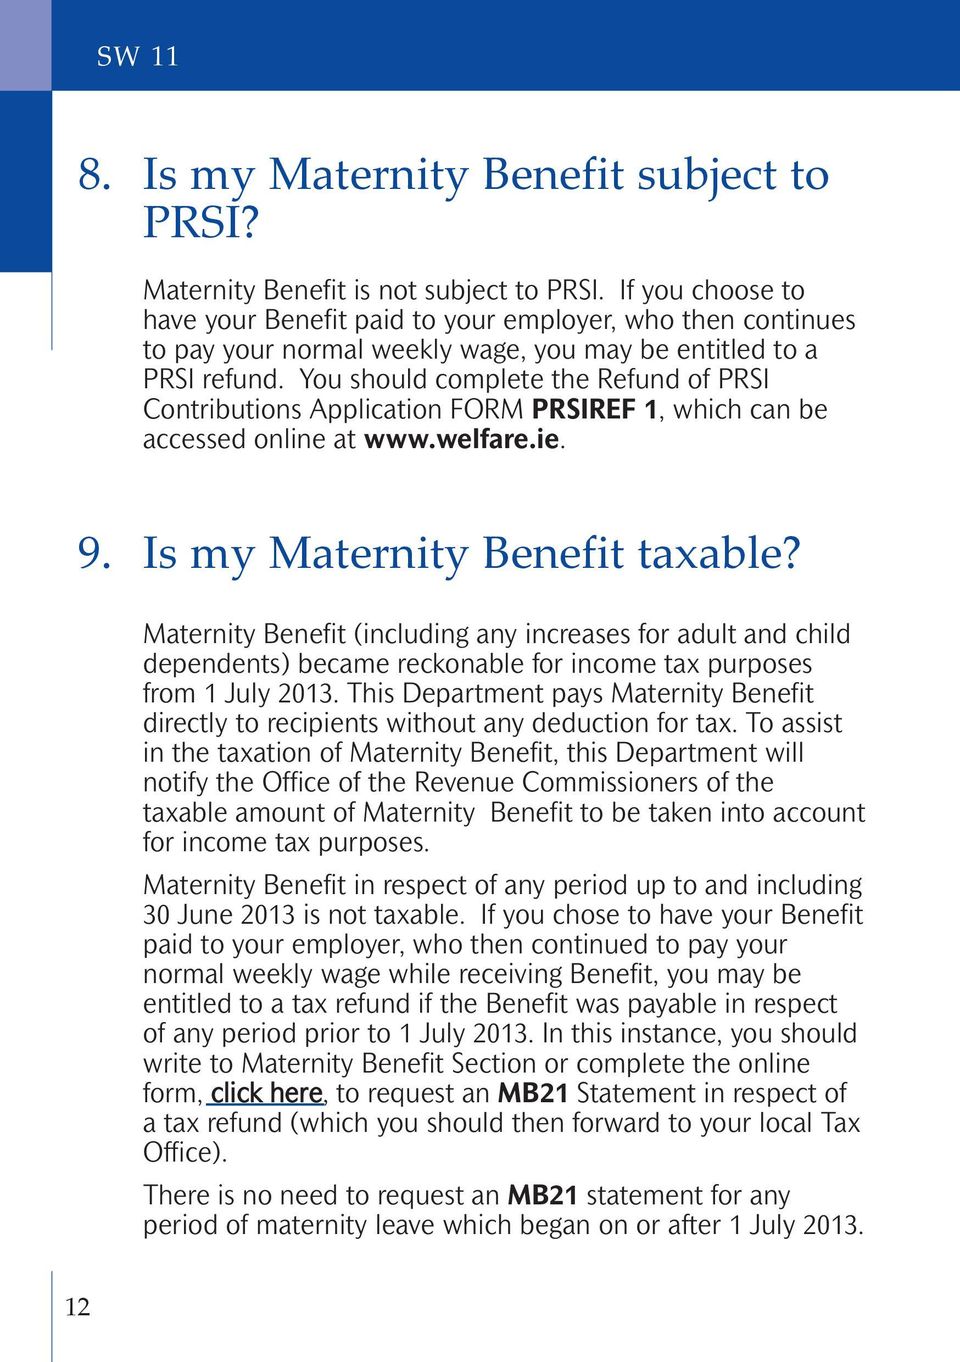 You should complete the Refund of PRSI Contributions Application FORM PRSIREF 1, which can be accessed online at www.welfare.ie. 9. Is my Maternity Benefit taxable?